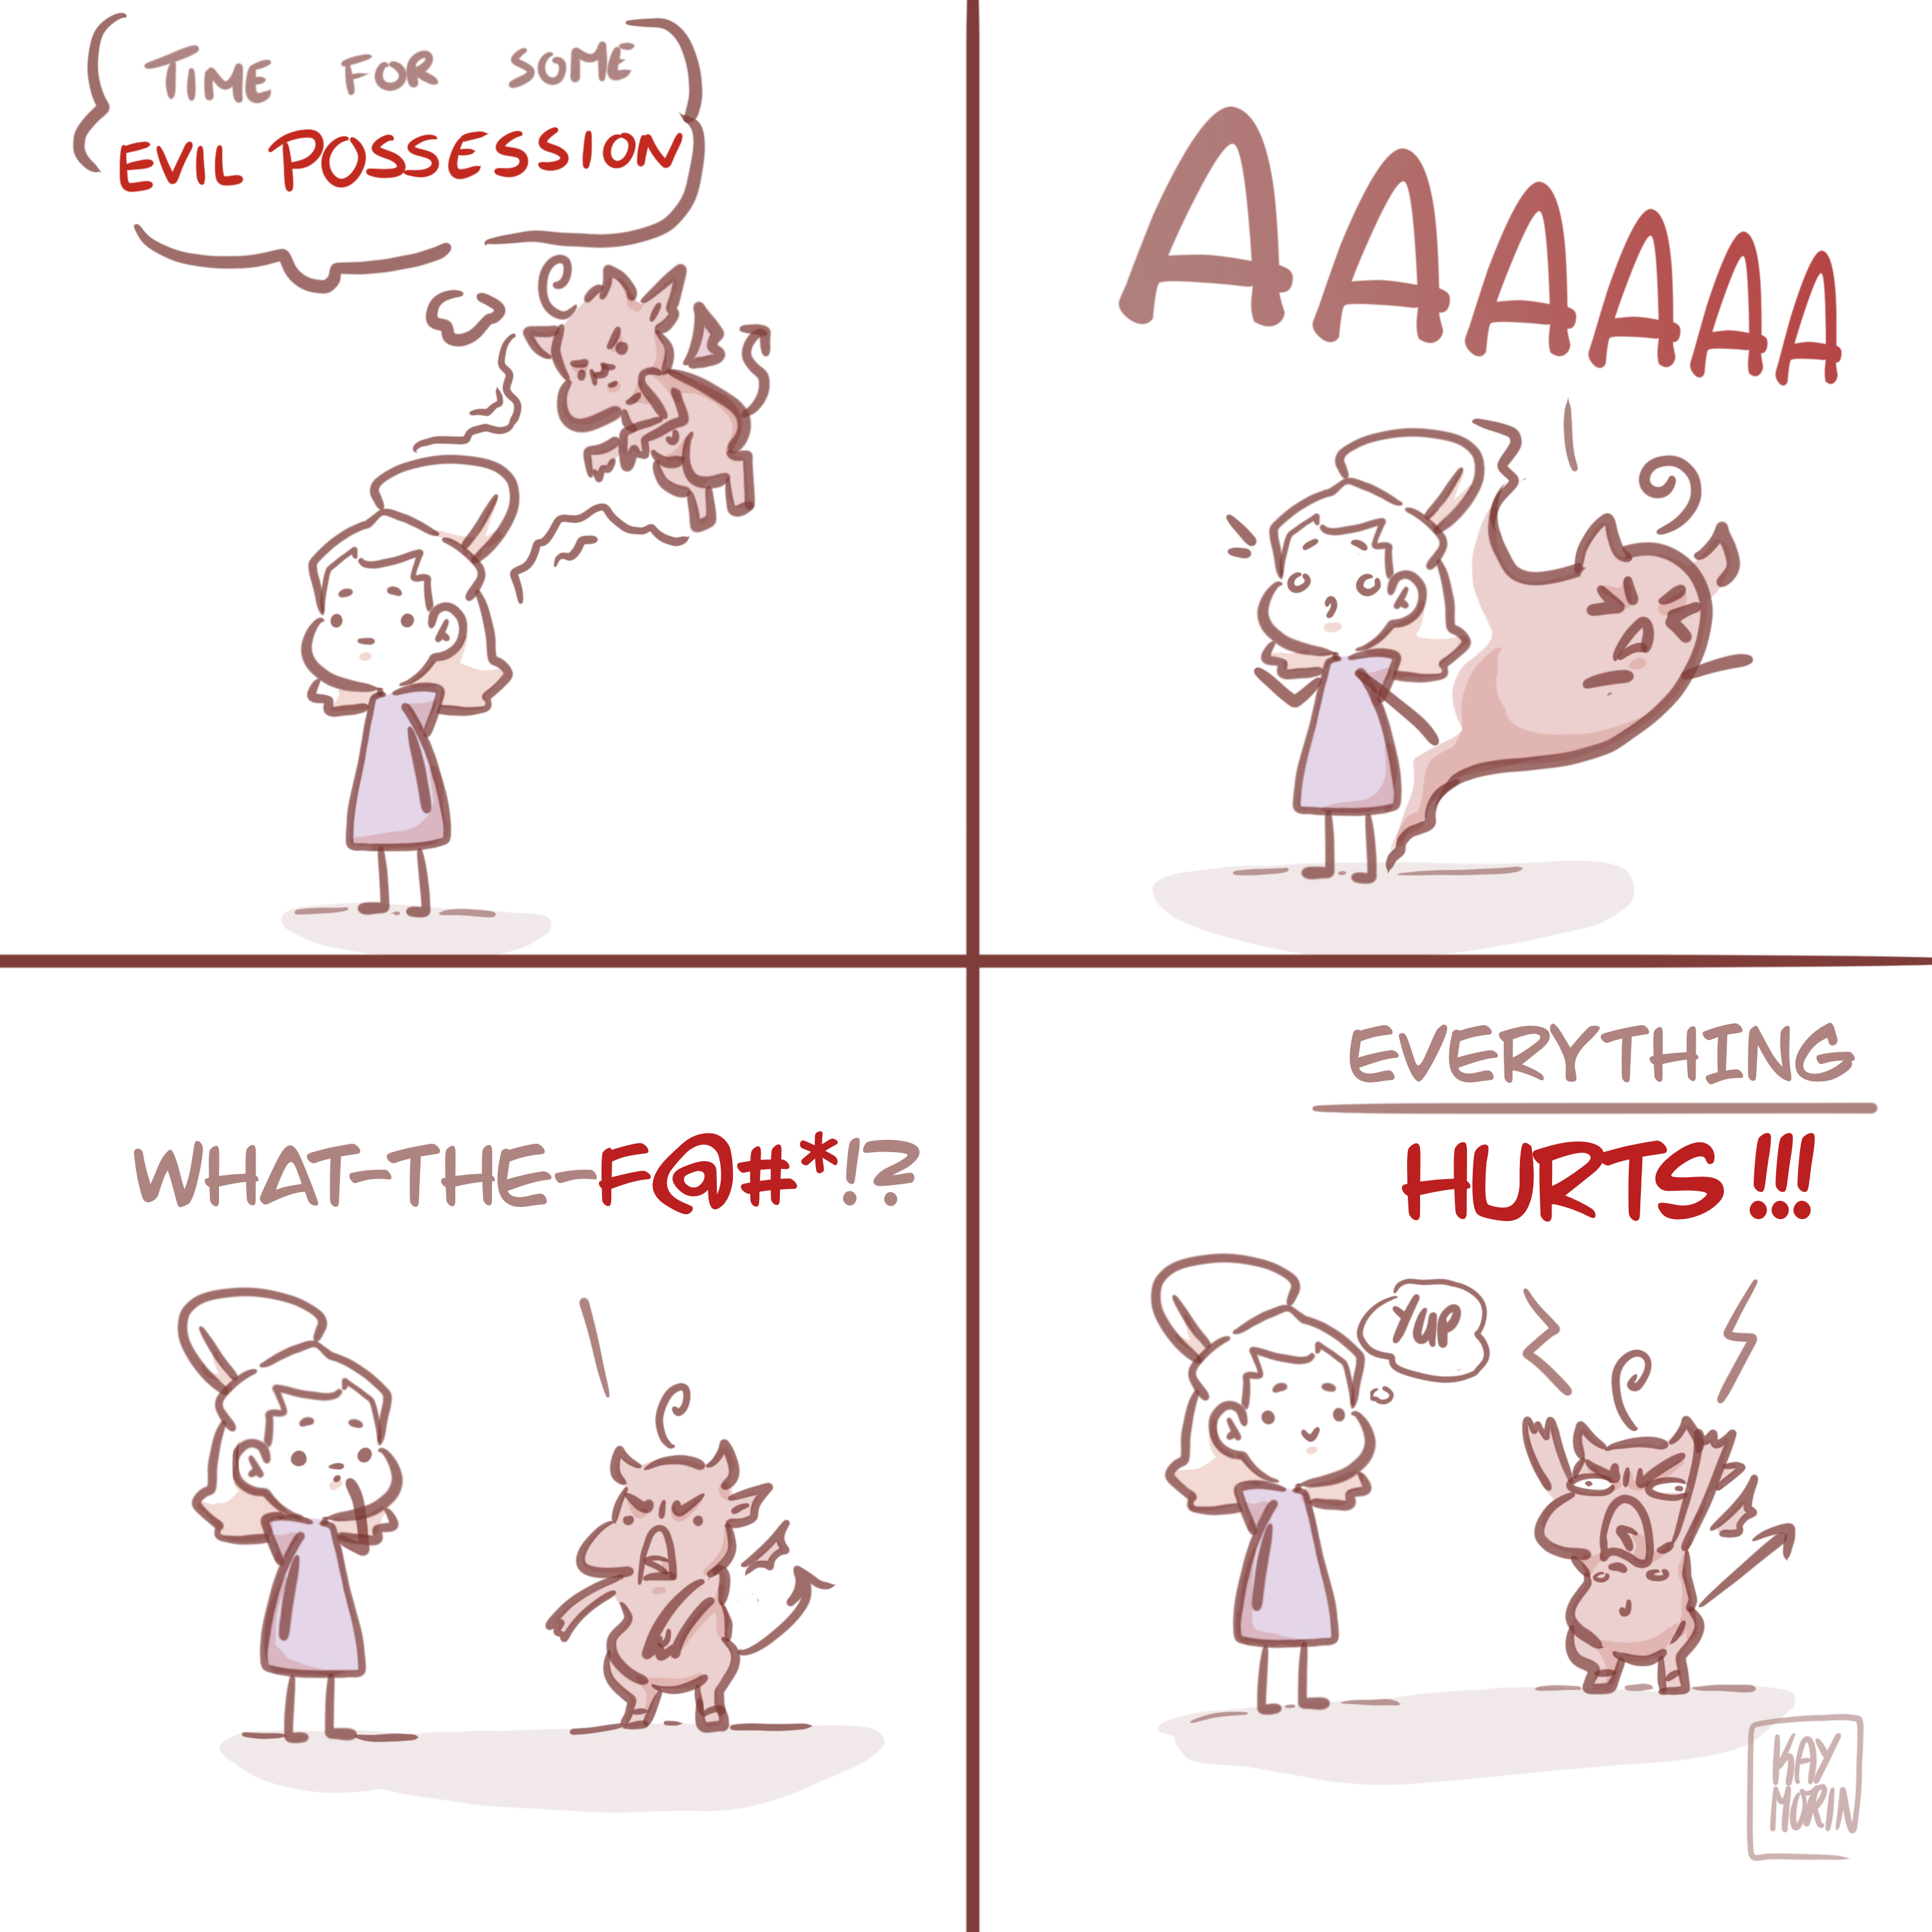 A little comic I drew about the endless, fun ol' pain